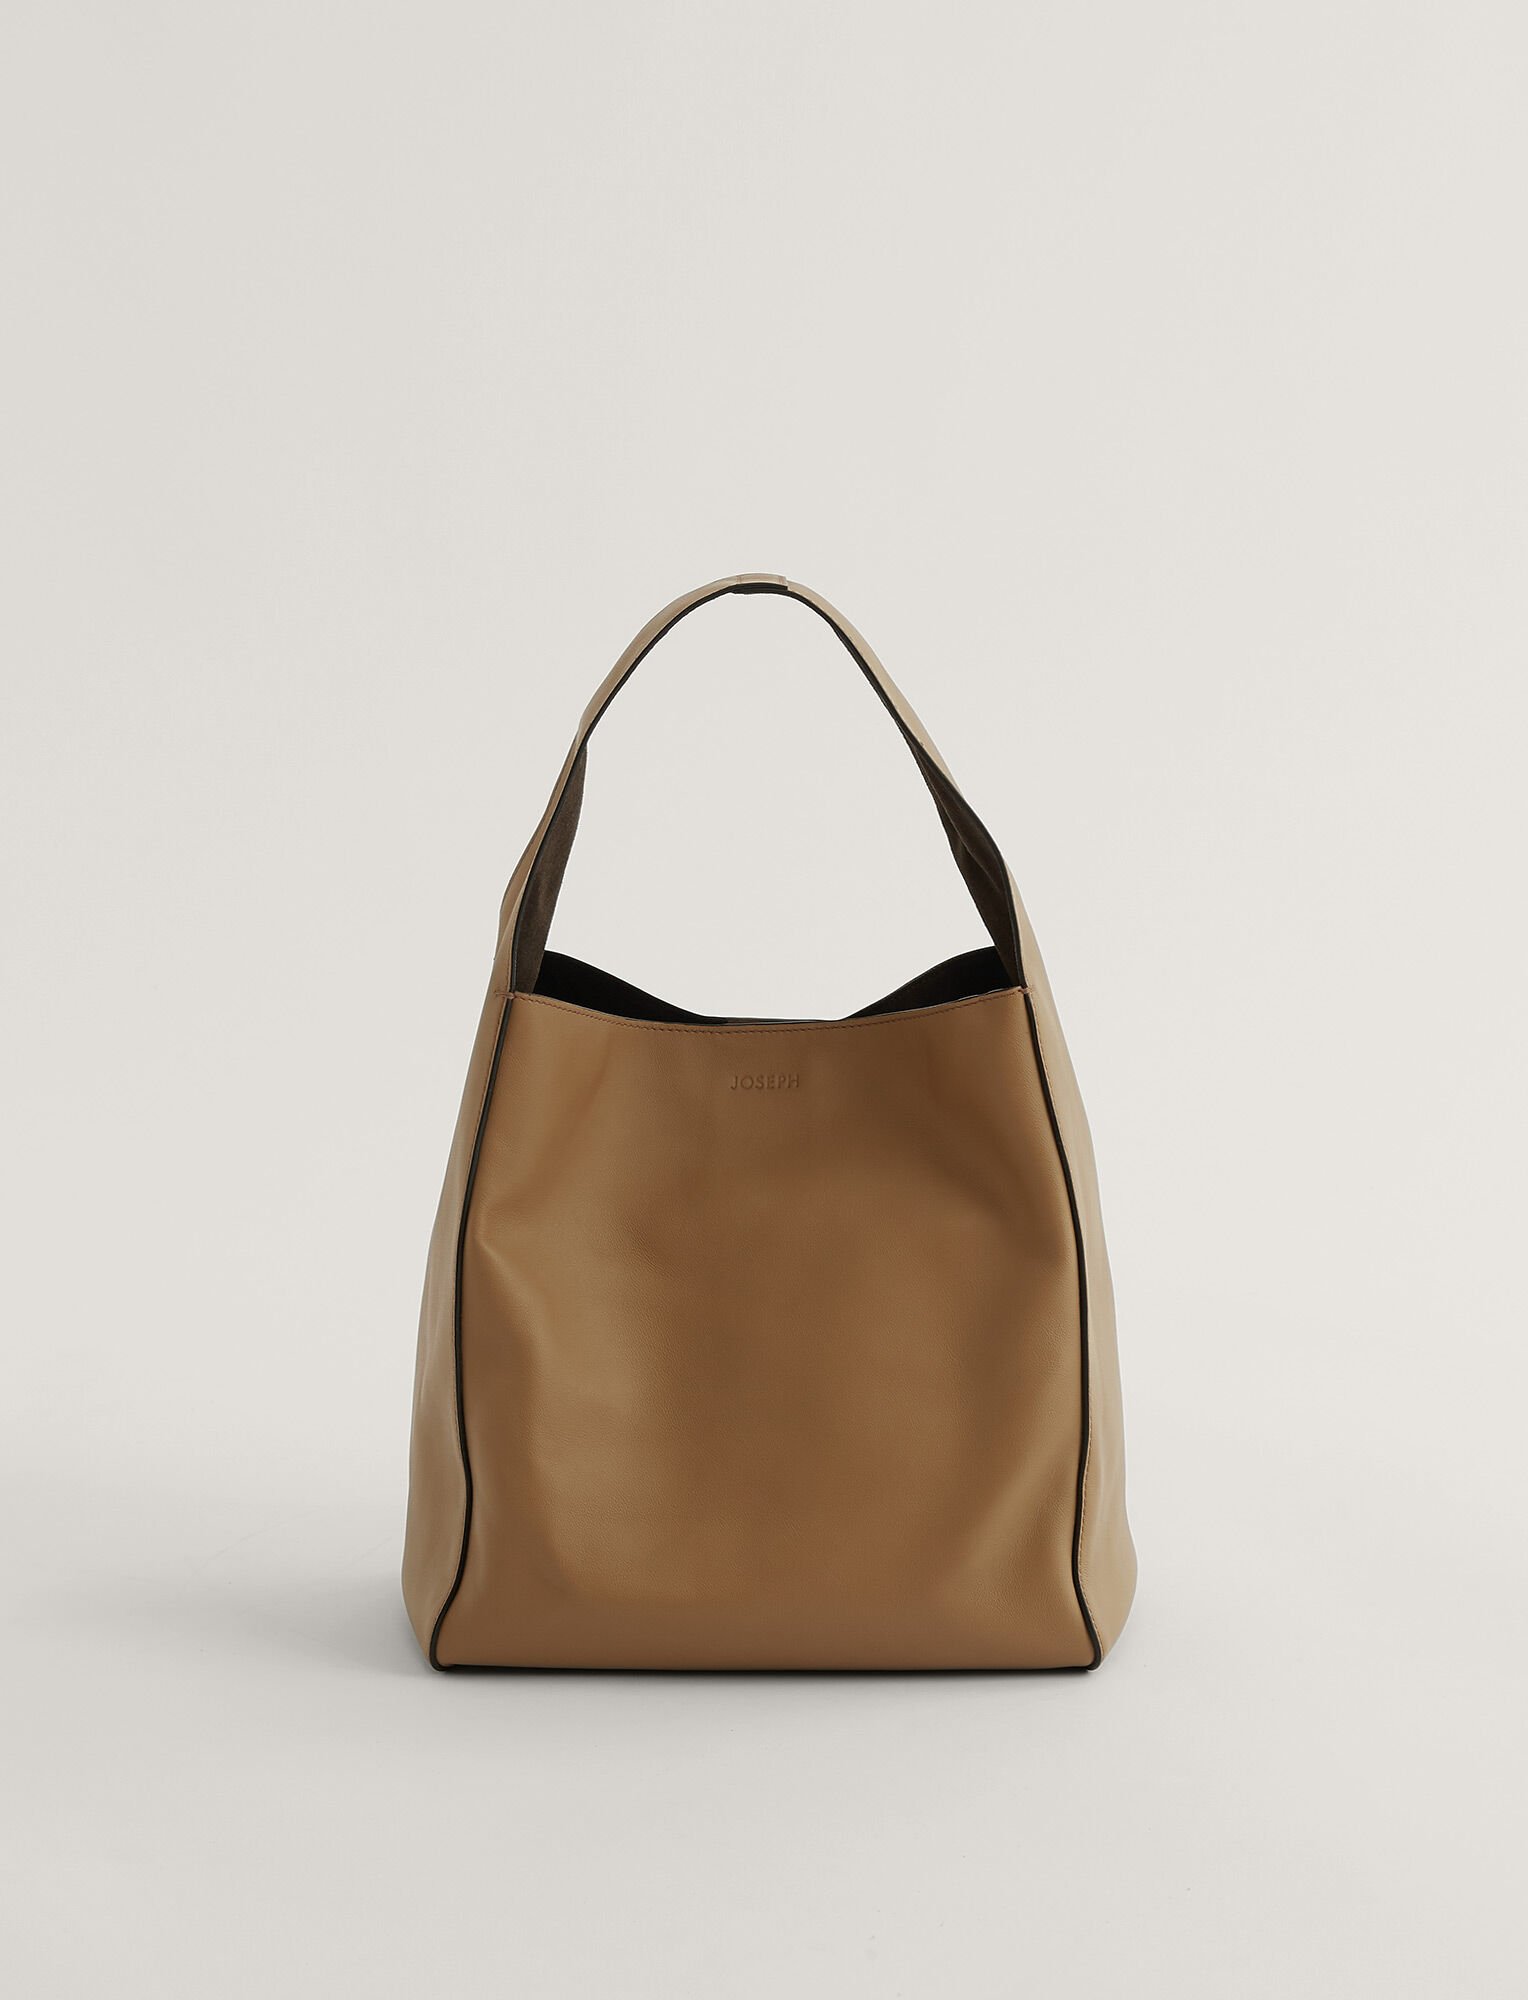 Joseph, Slouch S Bag, in Saddle